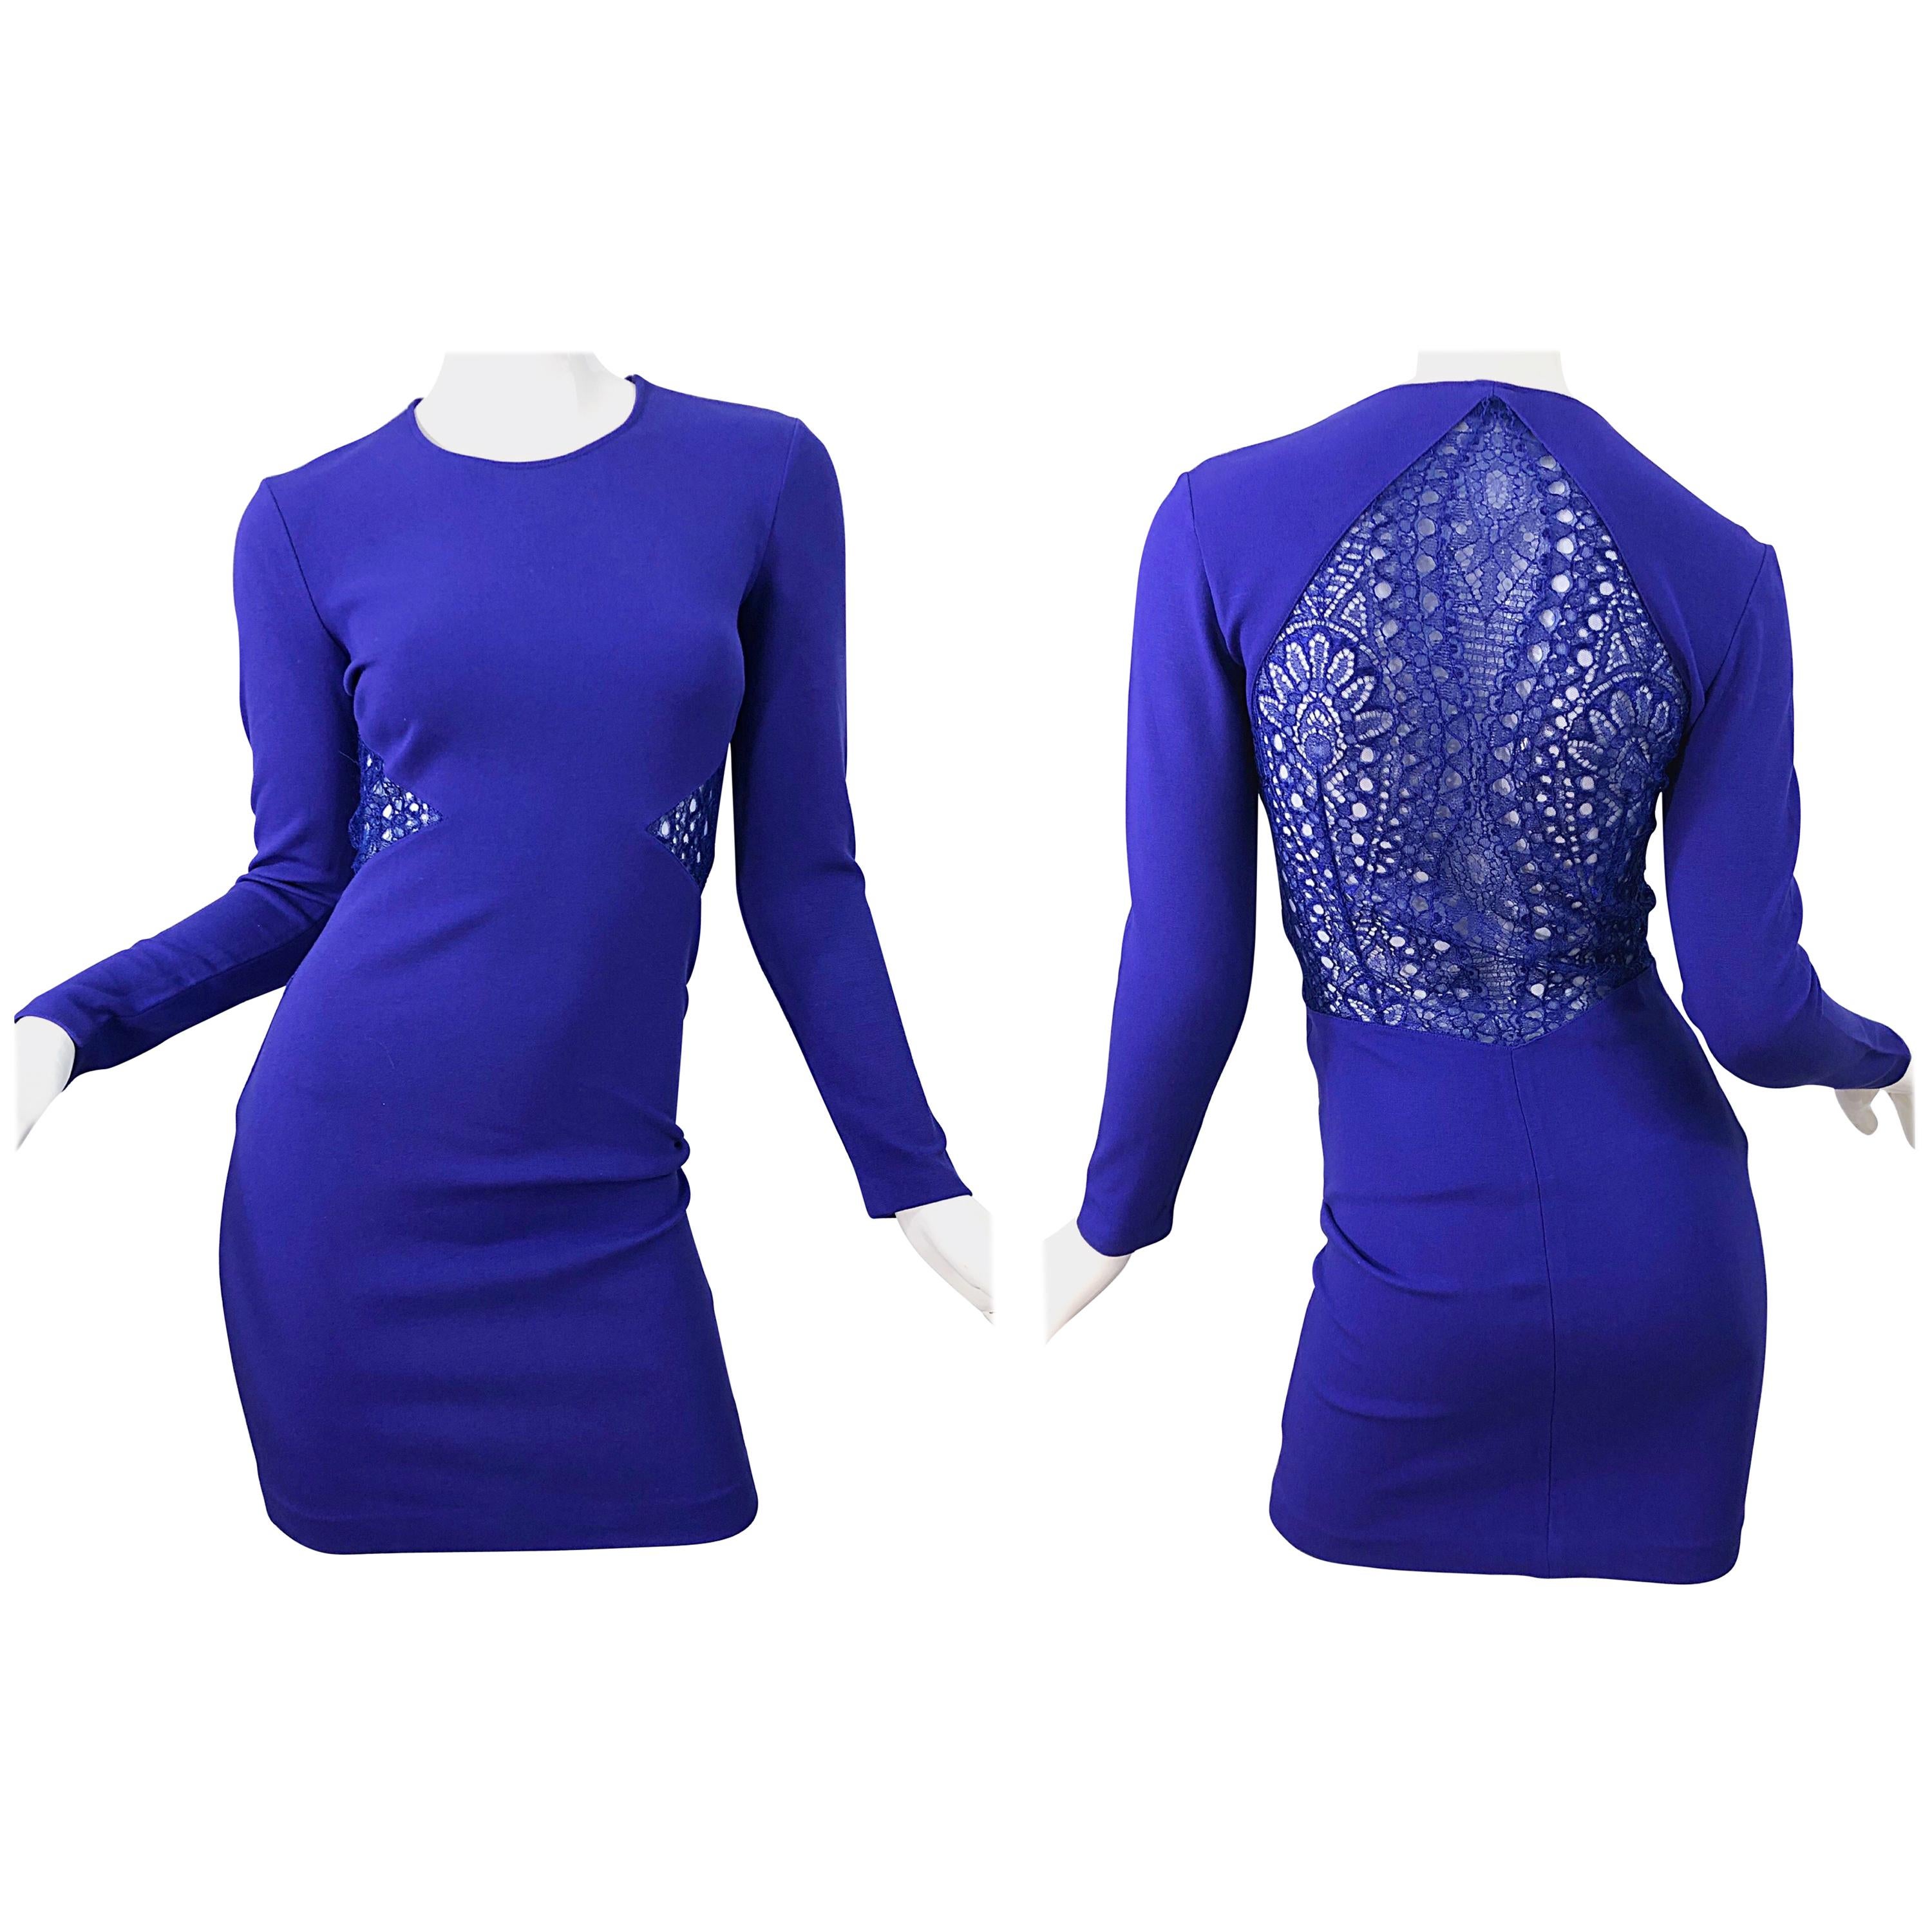 Emilio Pucci Fall 2012 Purple Rayon Lace Cut Out Long Sleeve Bodycon Dress